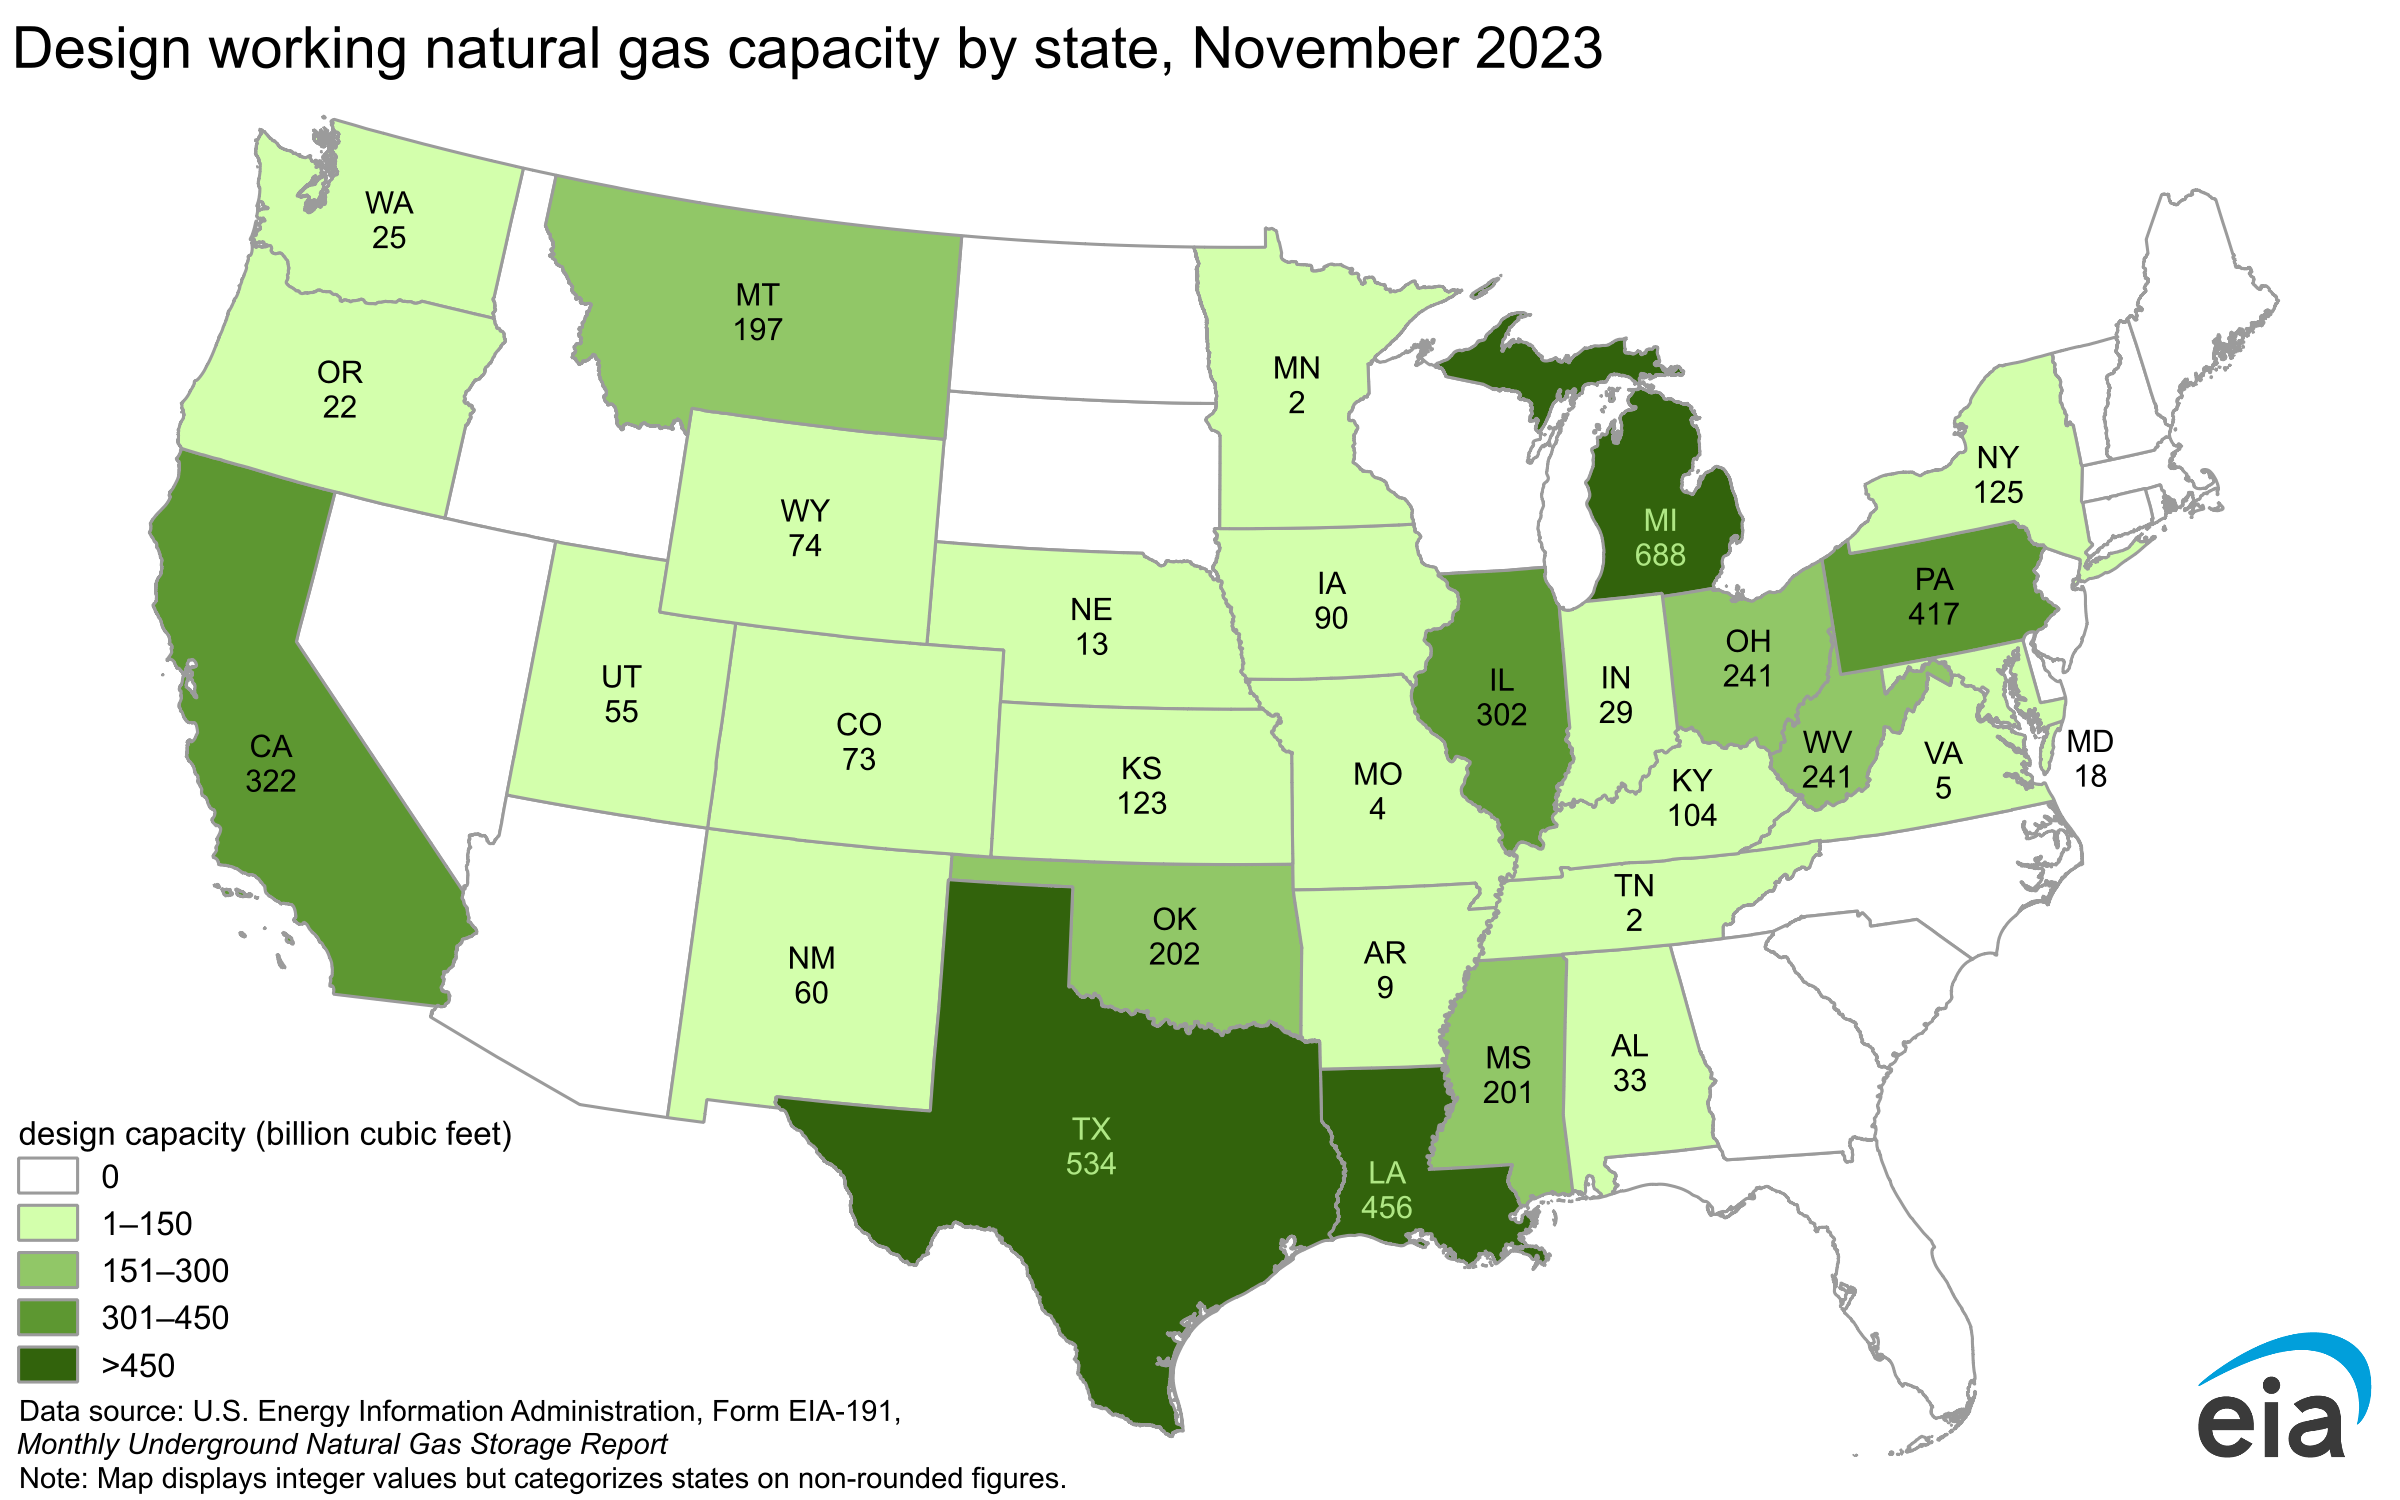 Design working natural gas capacity by state, November 2021